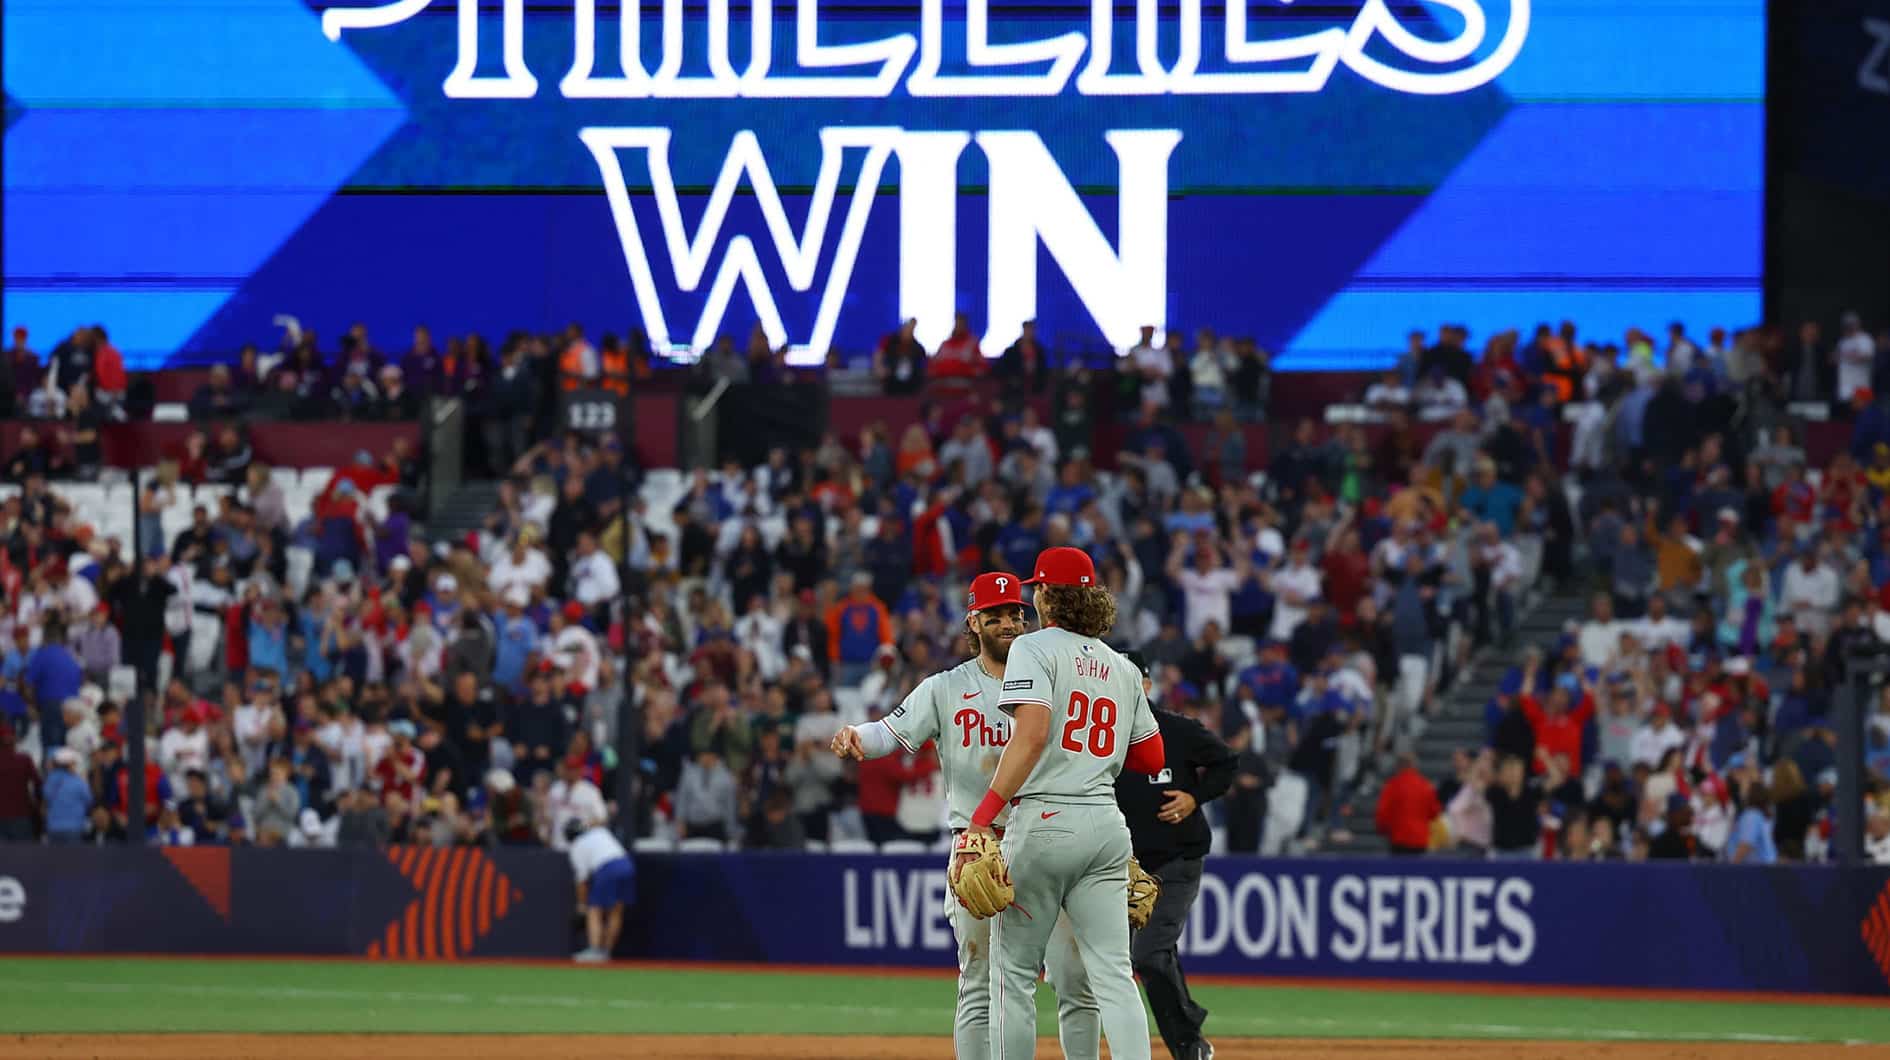 Philadelphia Phillies players Bryce Harper and Alec Bohm celebrate after defeating the New York Mets during a London Series baseball game at Queen Elizabeth Olympic Park.